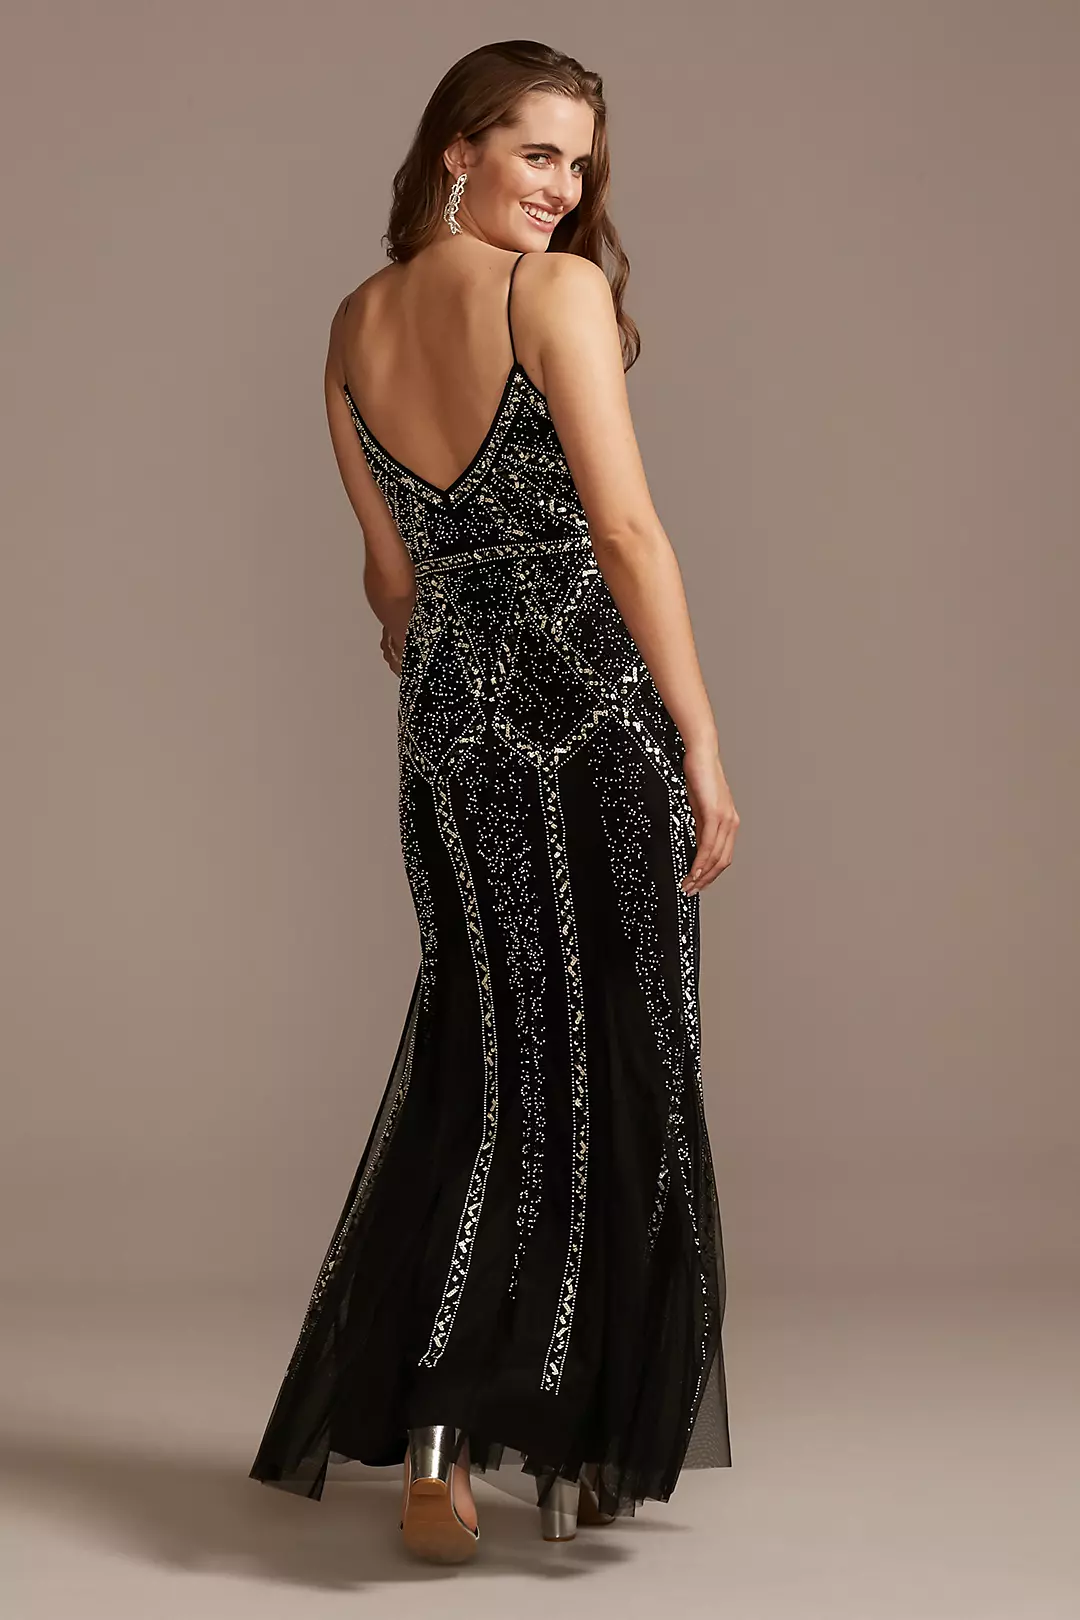 Linear Bead and Sequin Spaghetti Strap Dress Image 2